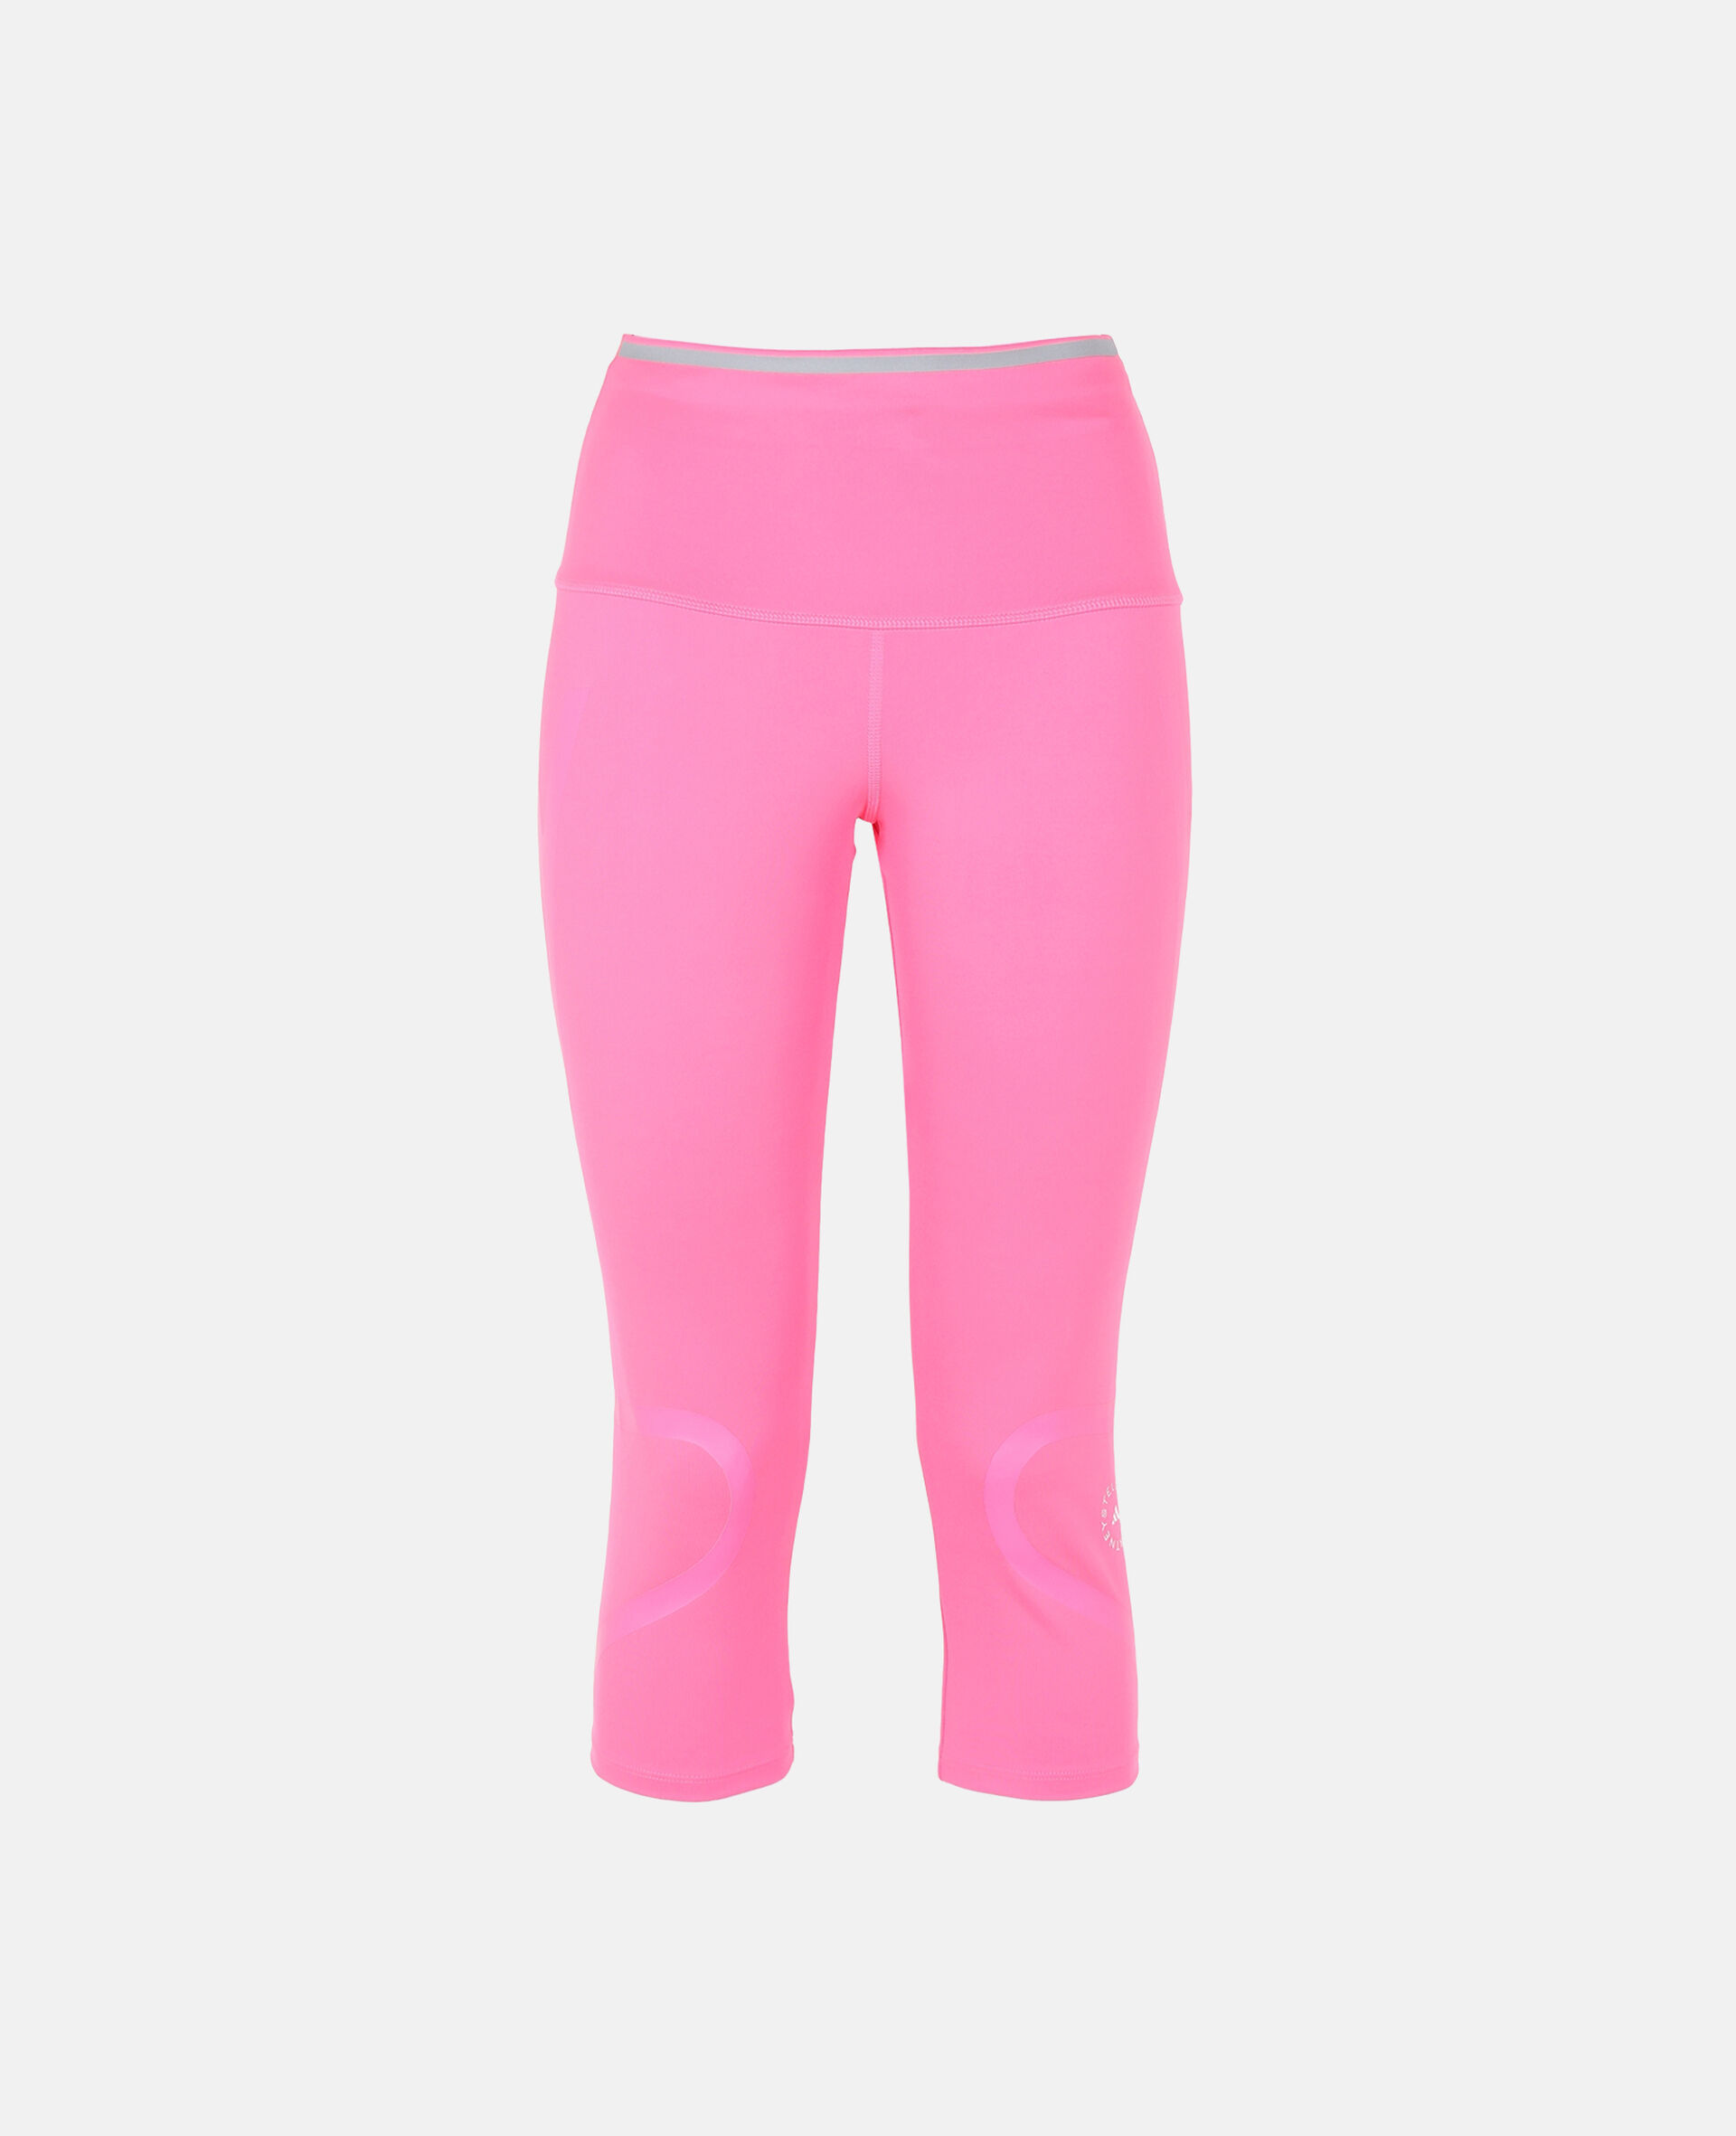 TruePace 3/4 Running Tights-Pink-large image number 0